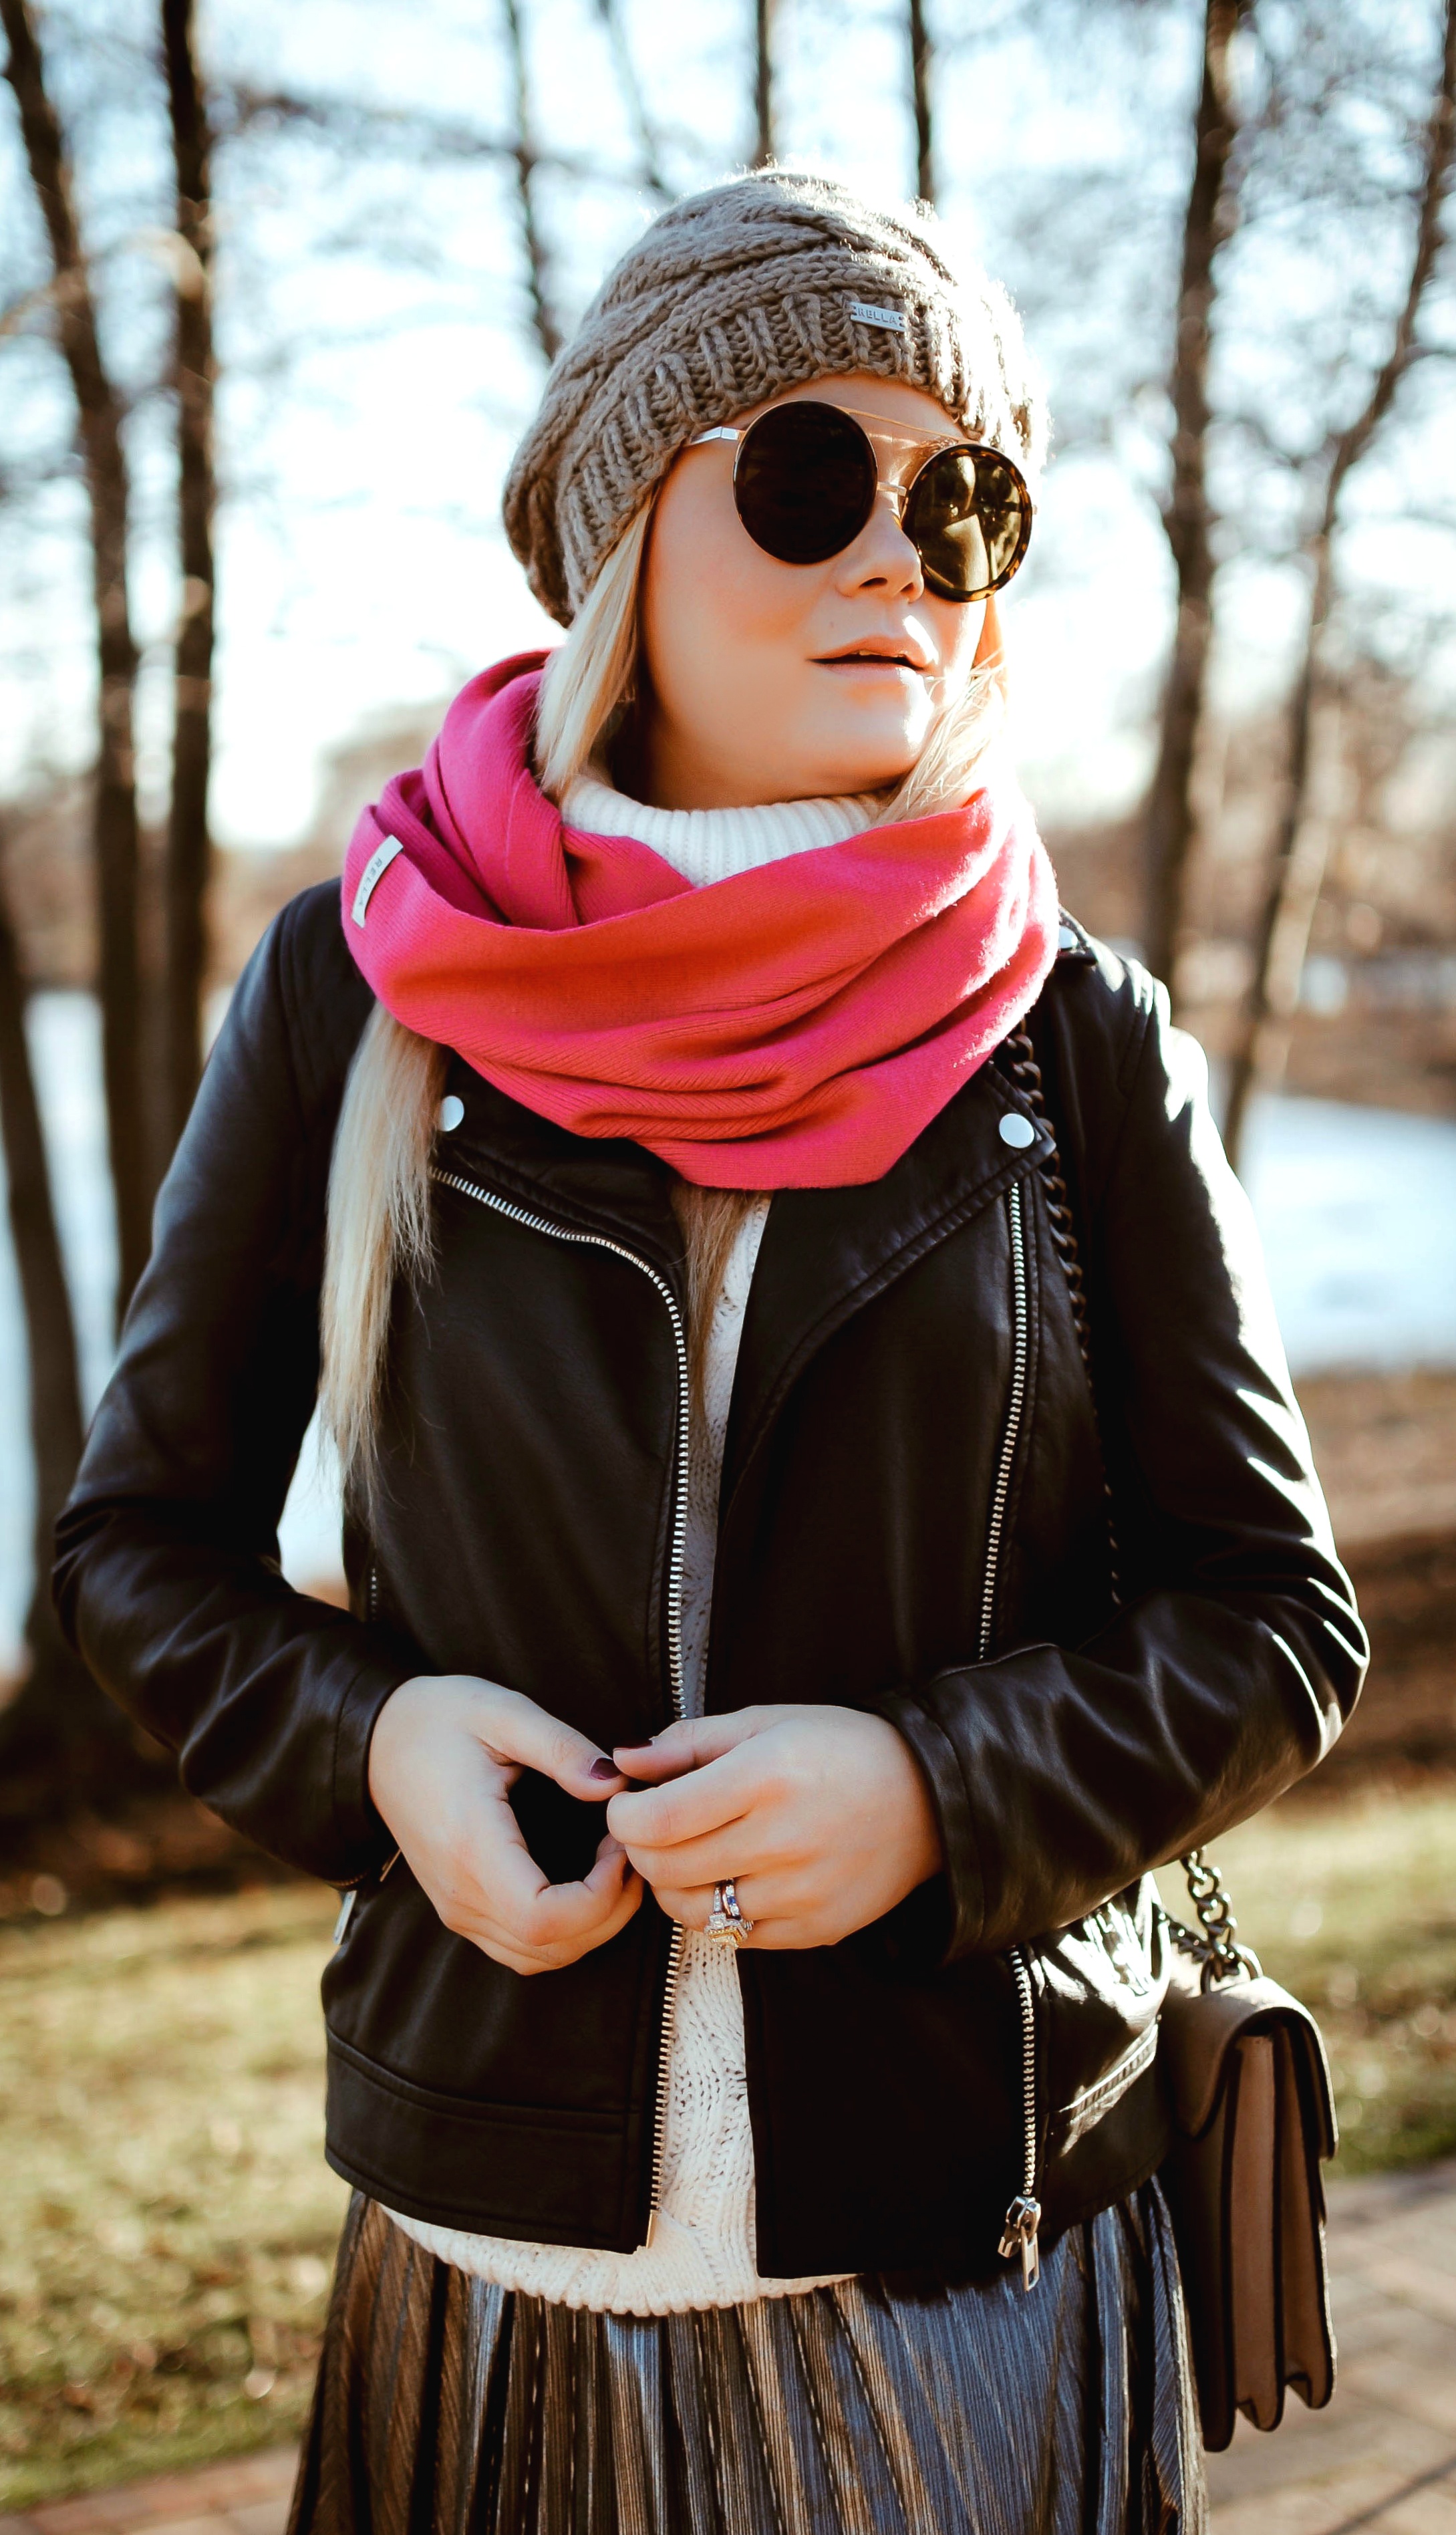 vanessa-lambert-blogger-behind-what-would-v-wear-bundles-up-in-a-rella-hat-and-scarf-to-keeo-warm-during-winter-in-chicago_5